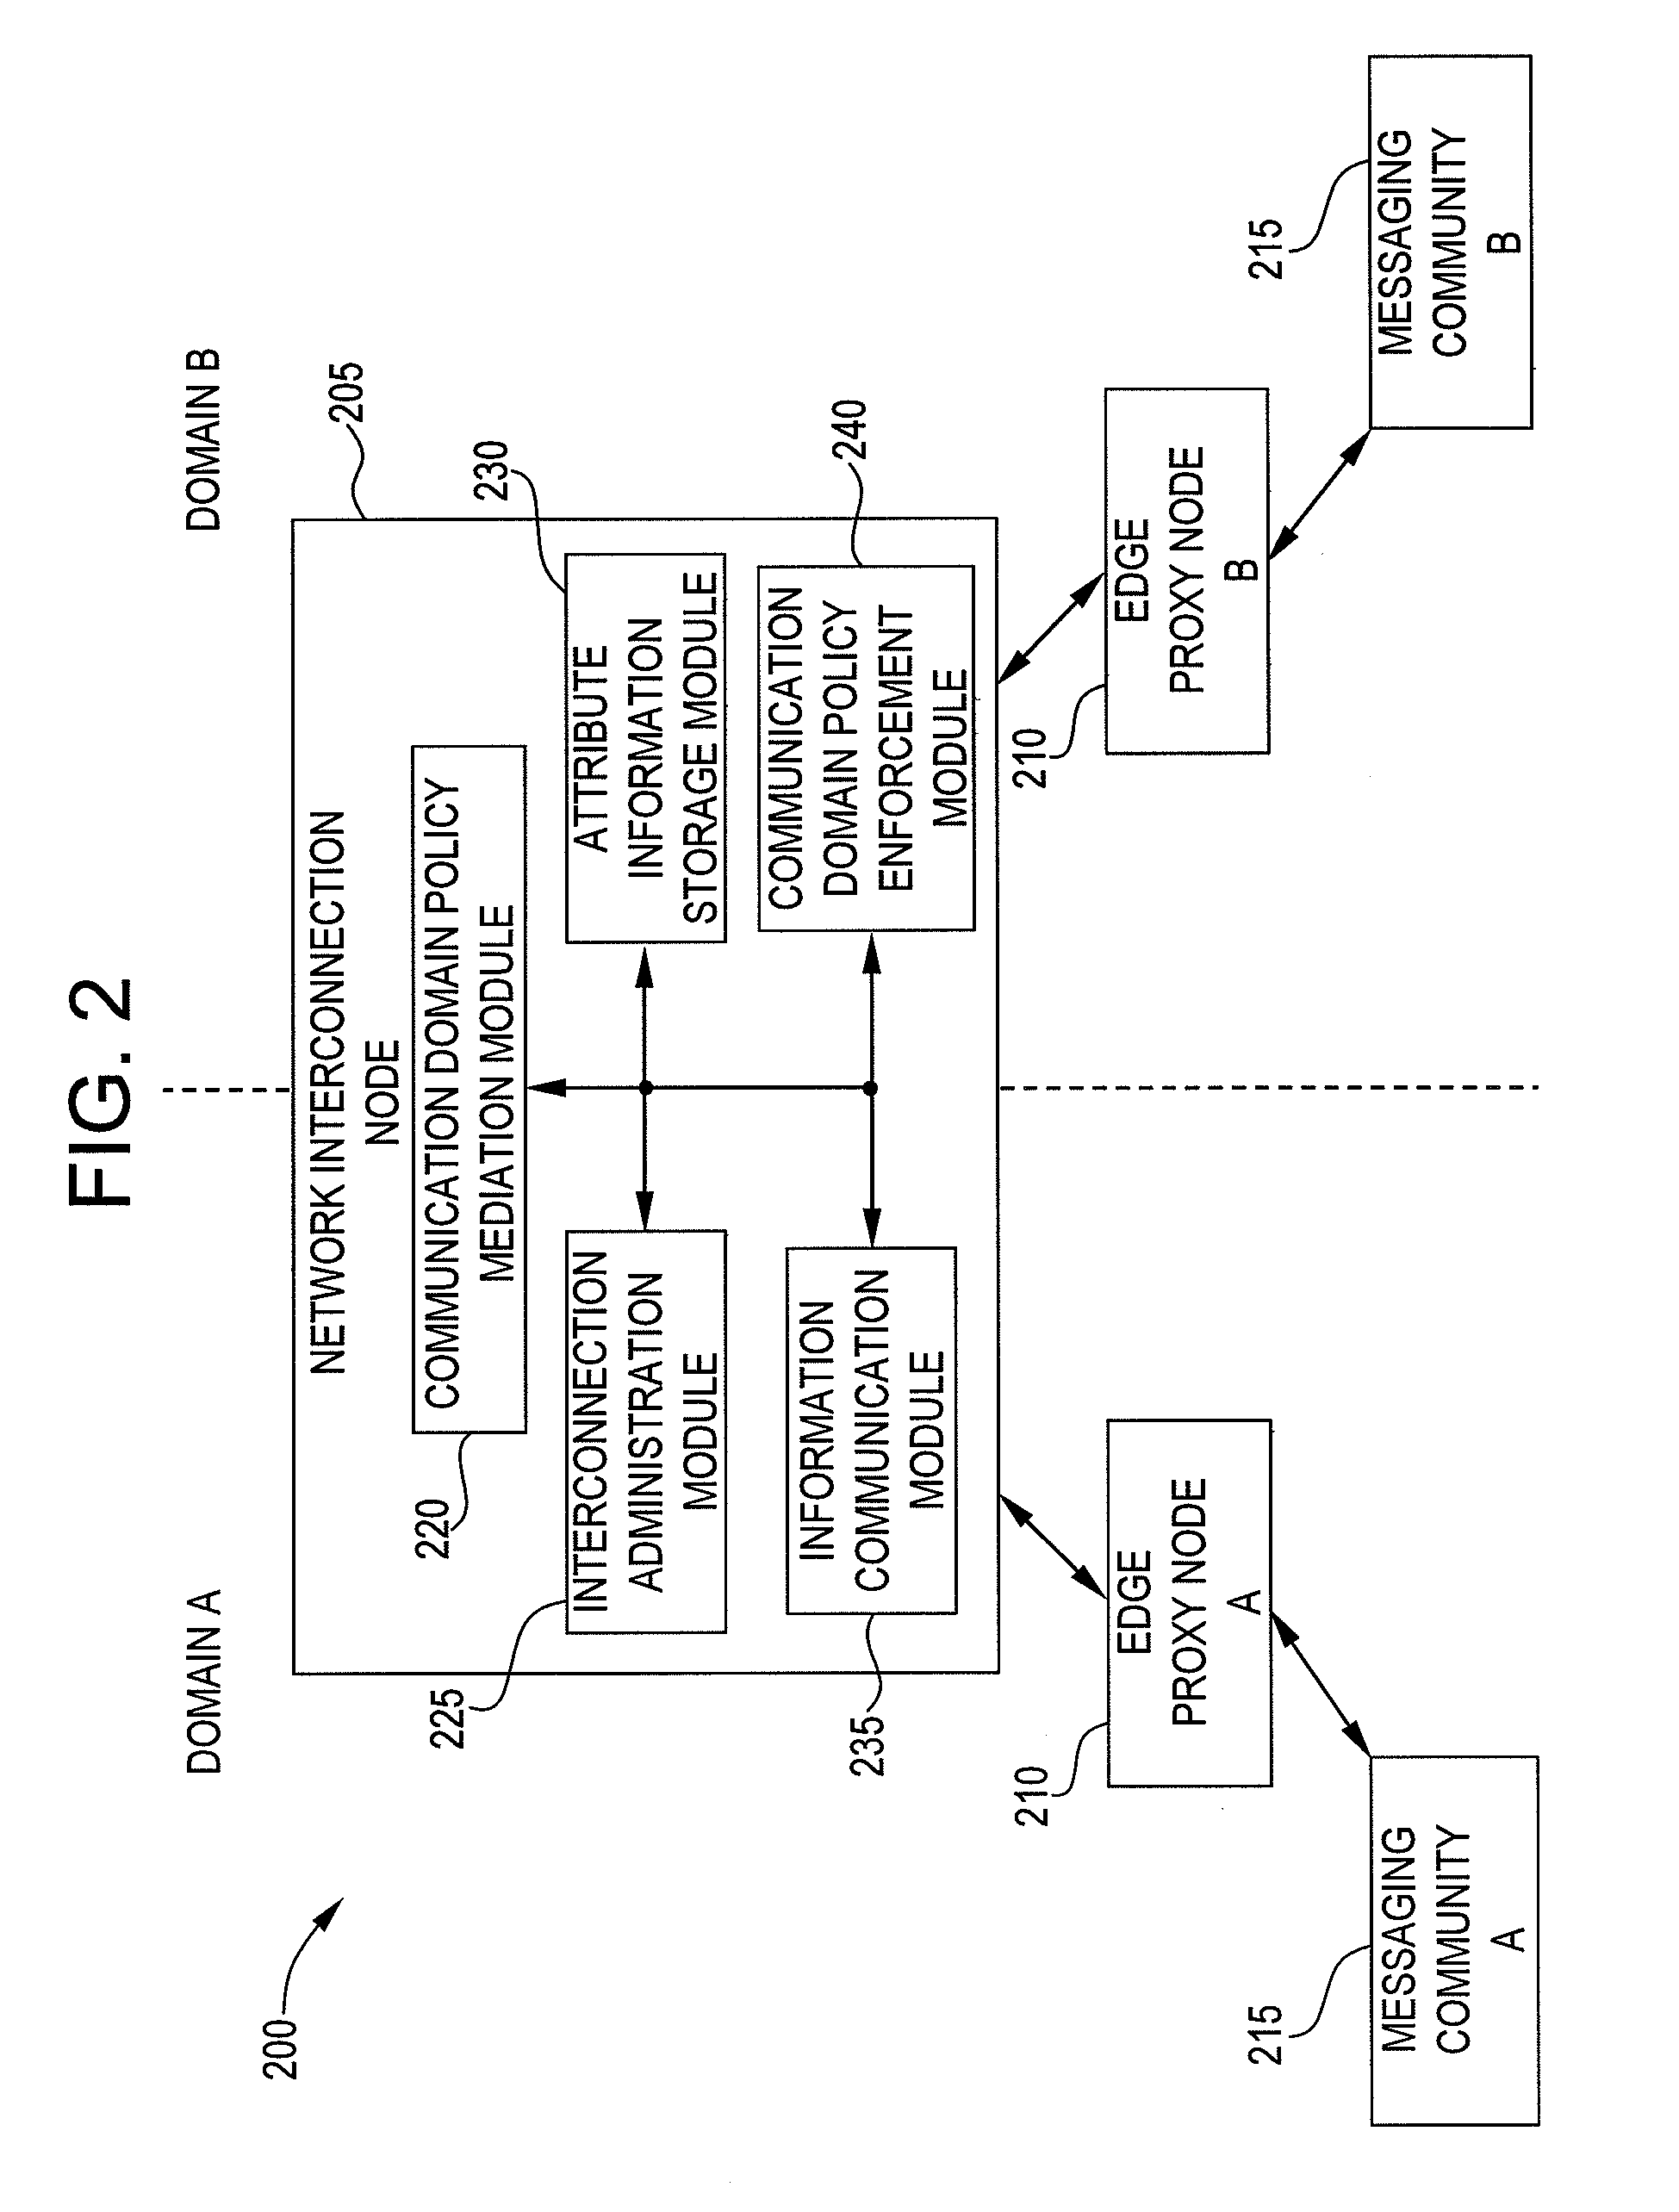 System and method for managing domain policy for interconnected communication networks